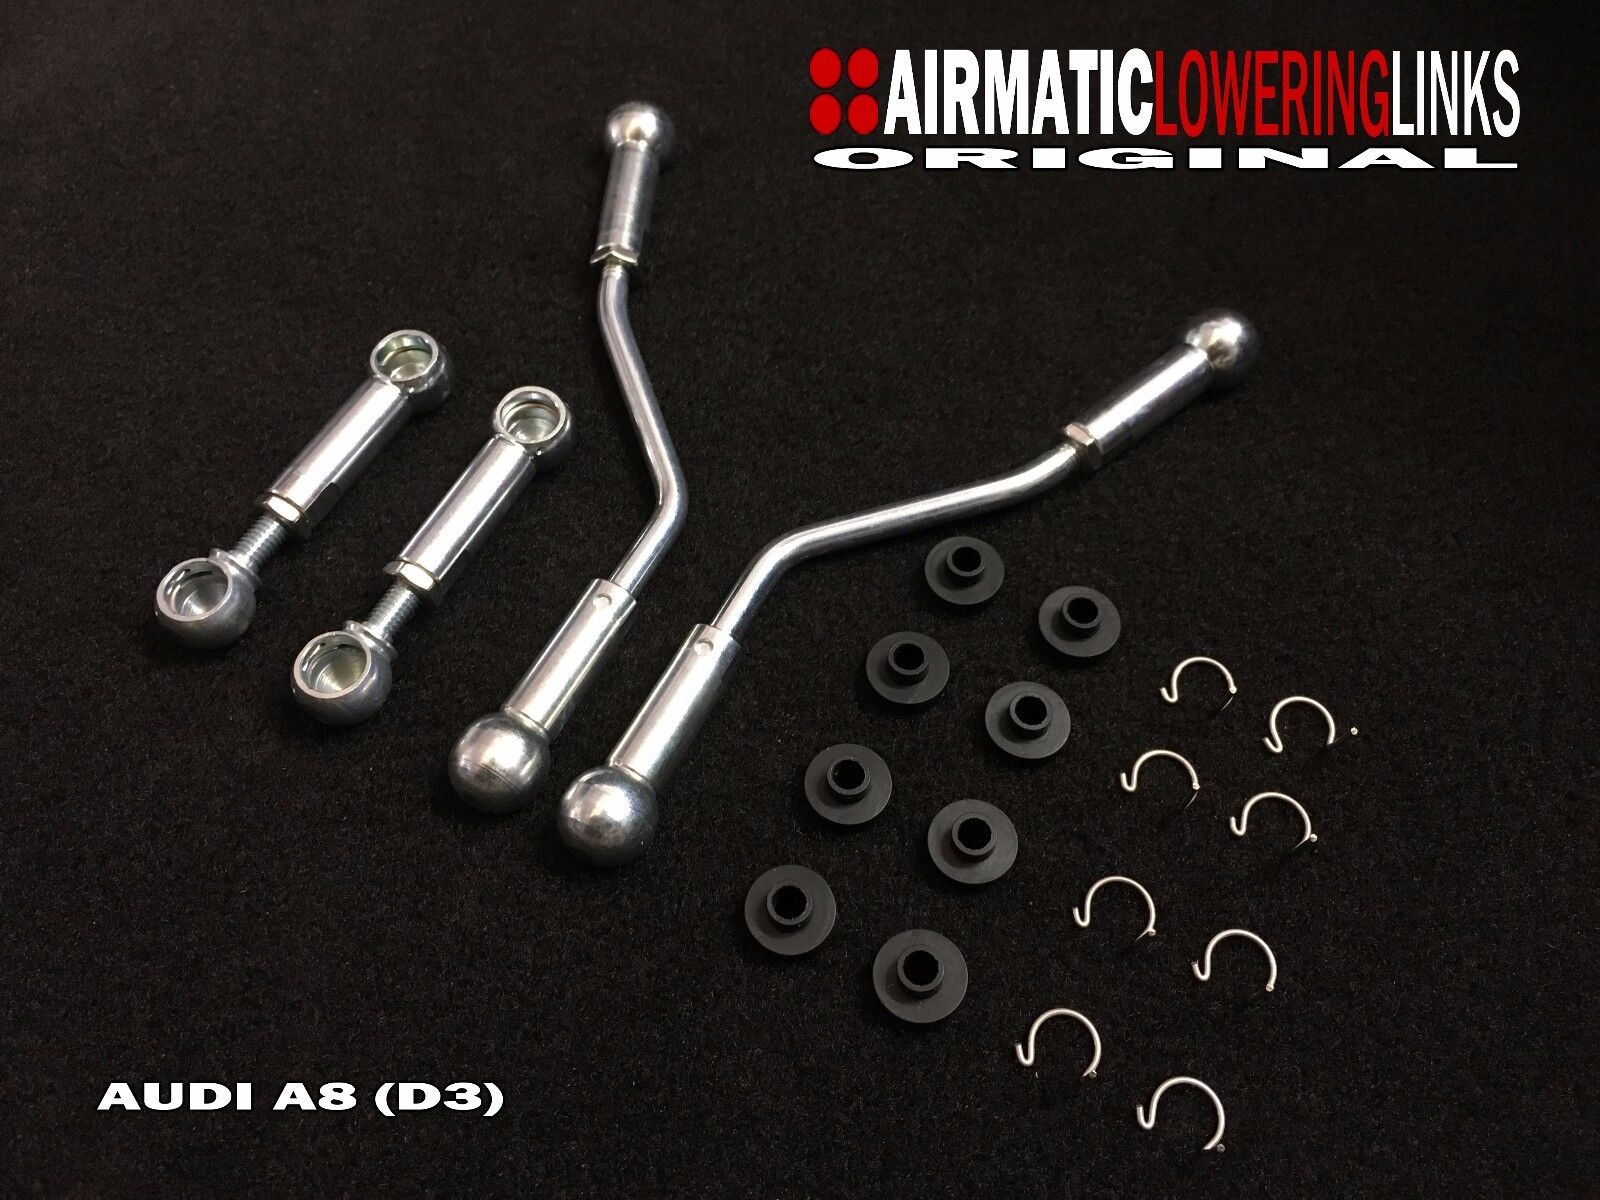 AUDI A8 S8 (D3) AIR SUSPENSION LOWERING KIT / LINKAGES / LINKS